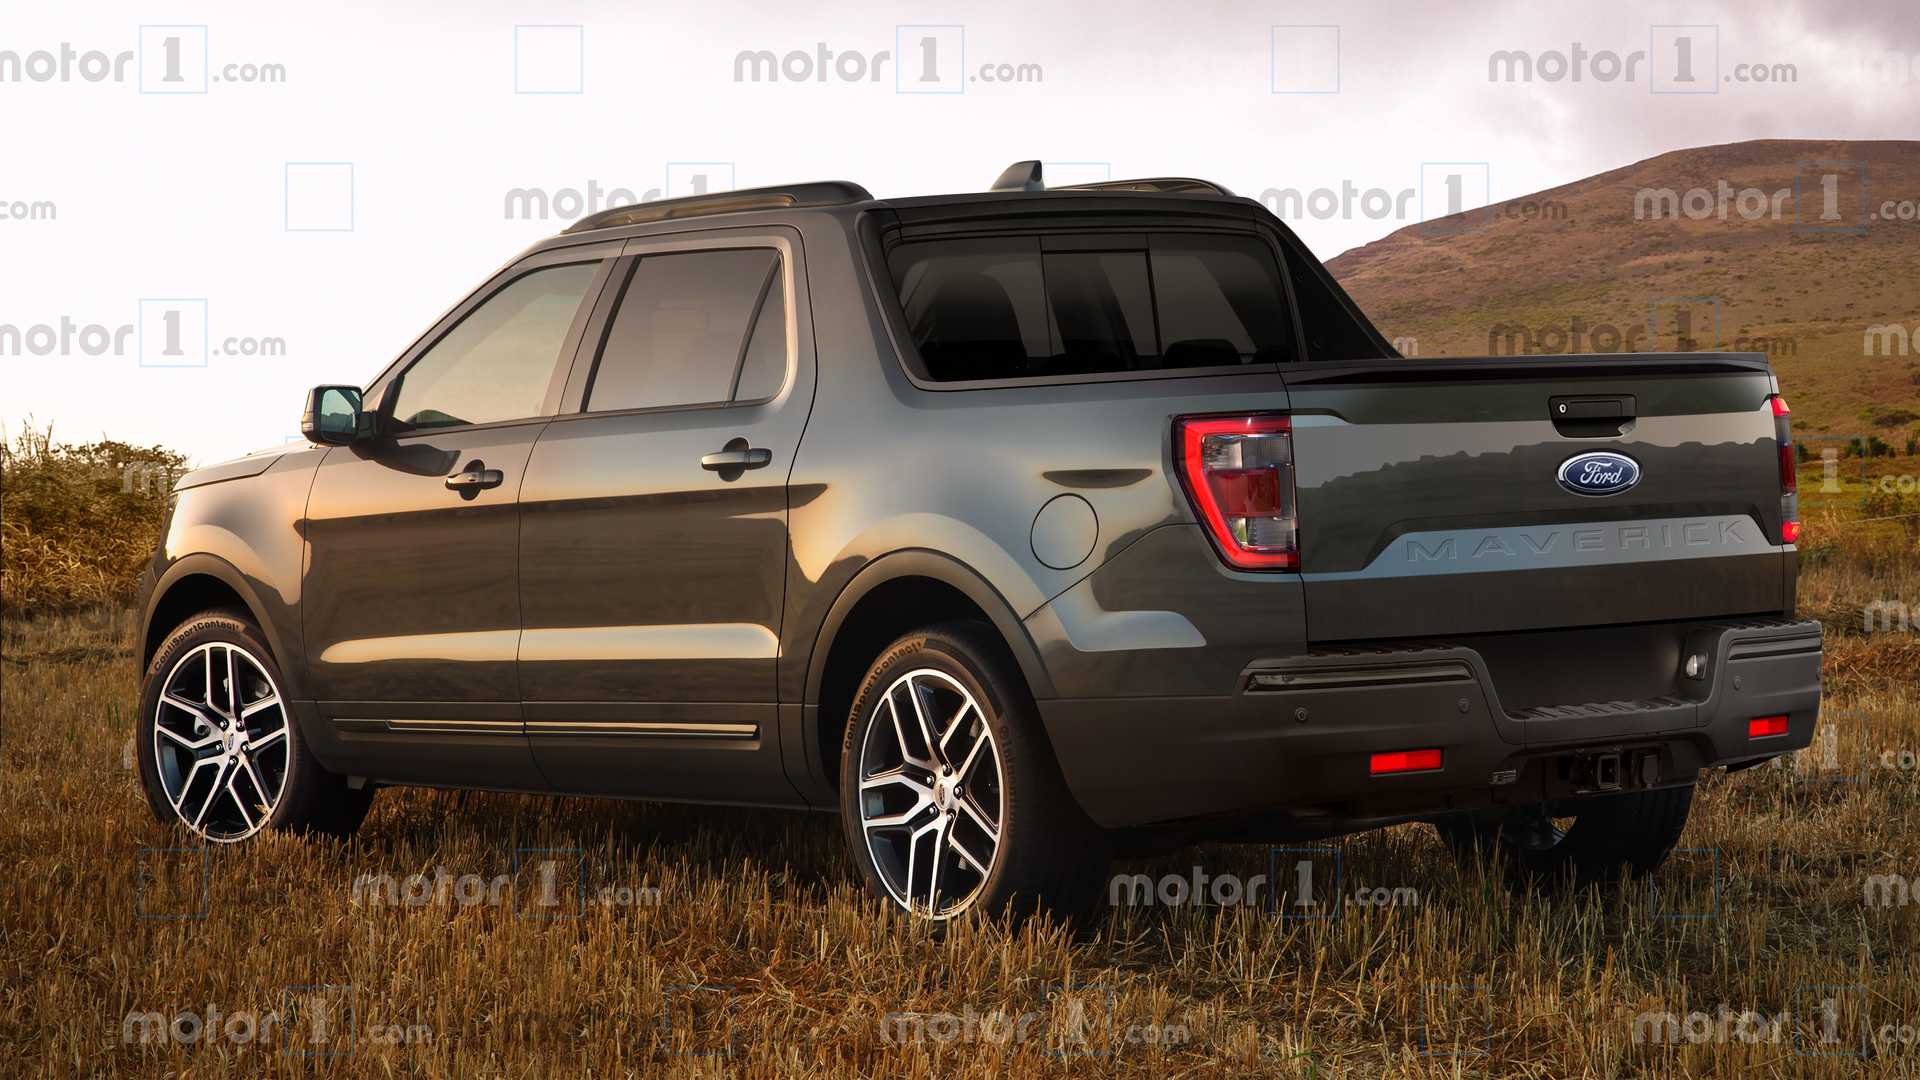 2022 Ford Maverick Pickup Truck Here's The Details With Leaked Photos